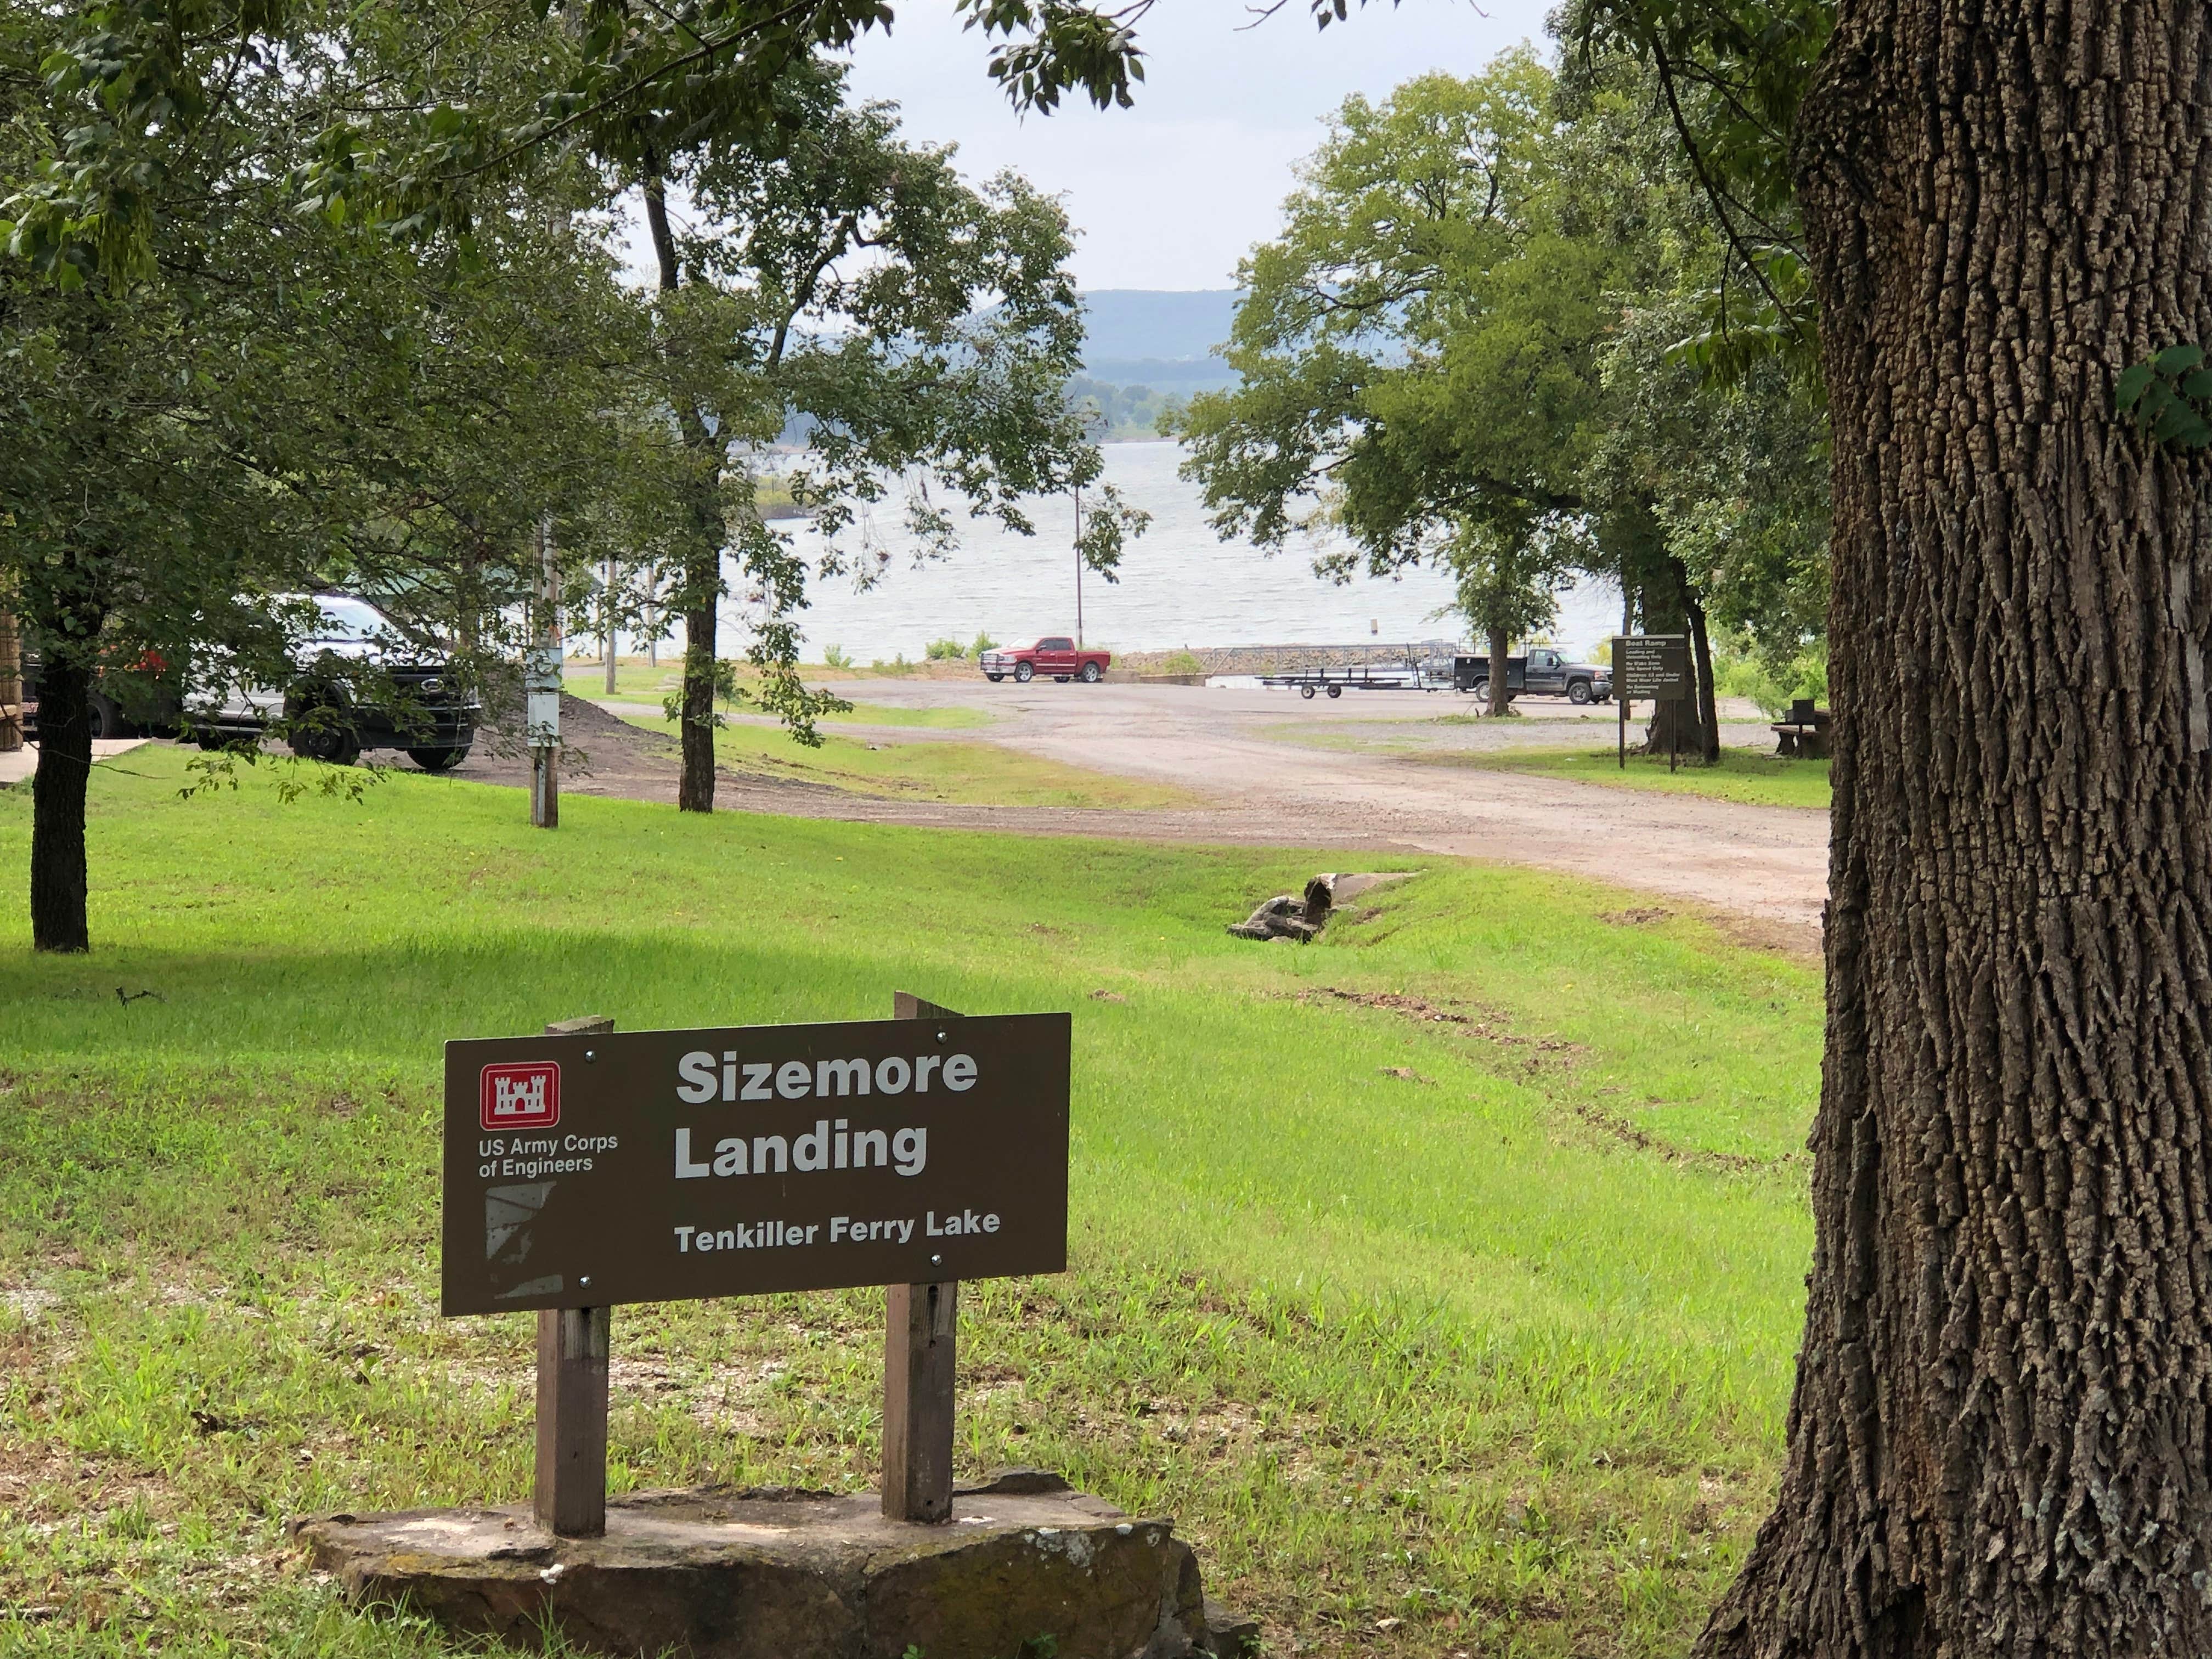 Camper submitted image from Sizemore Landing - Tenkiller Ferry Lake - 2